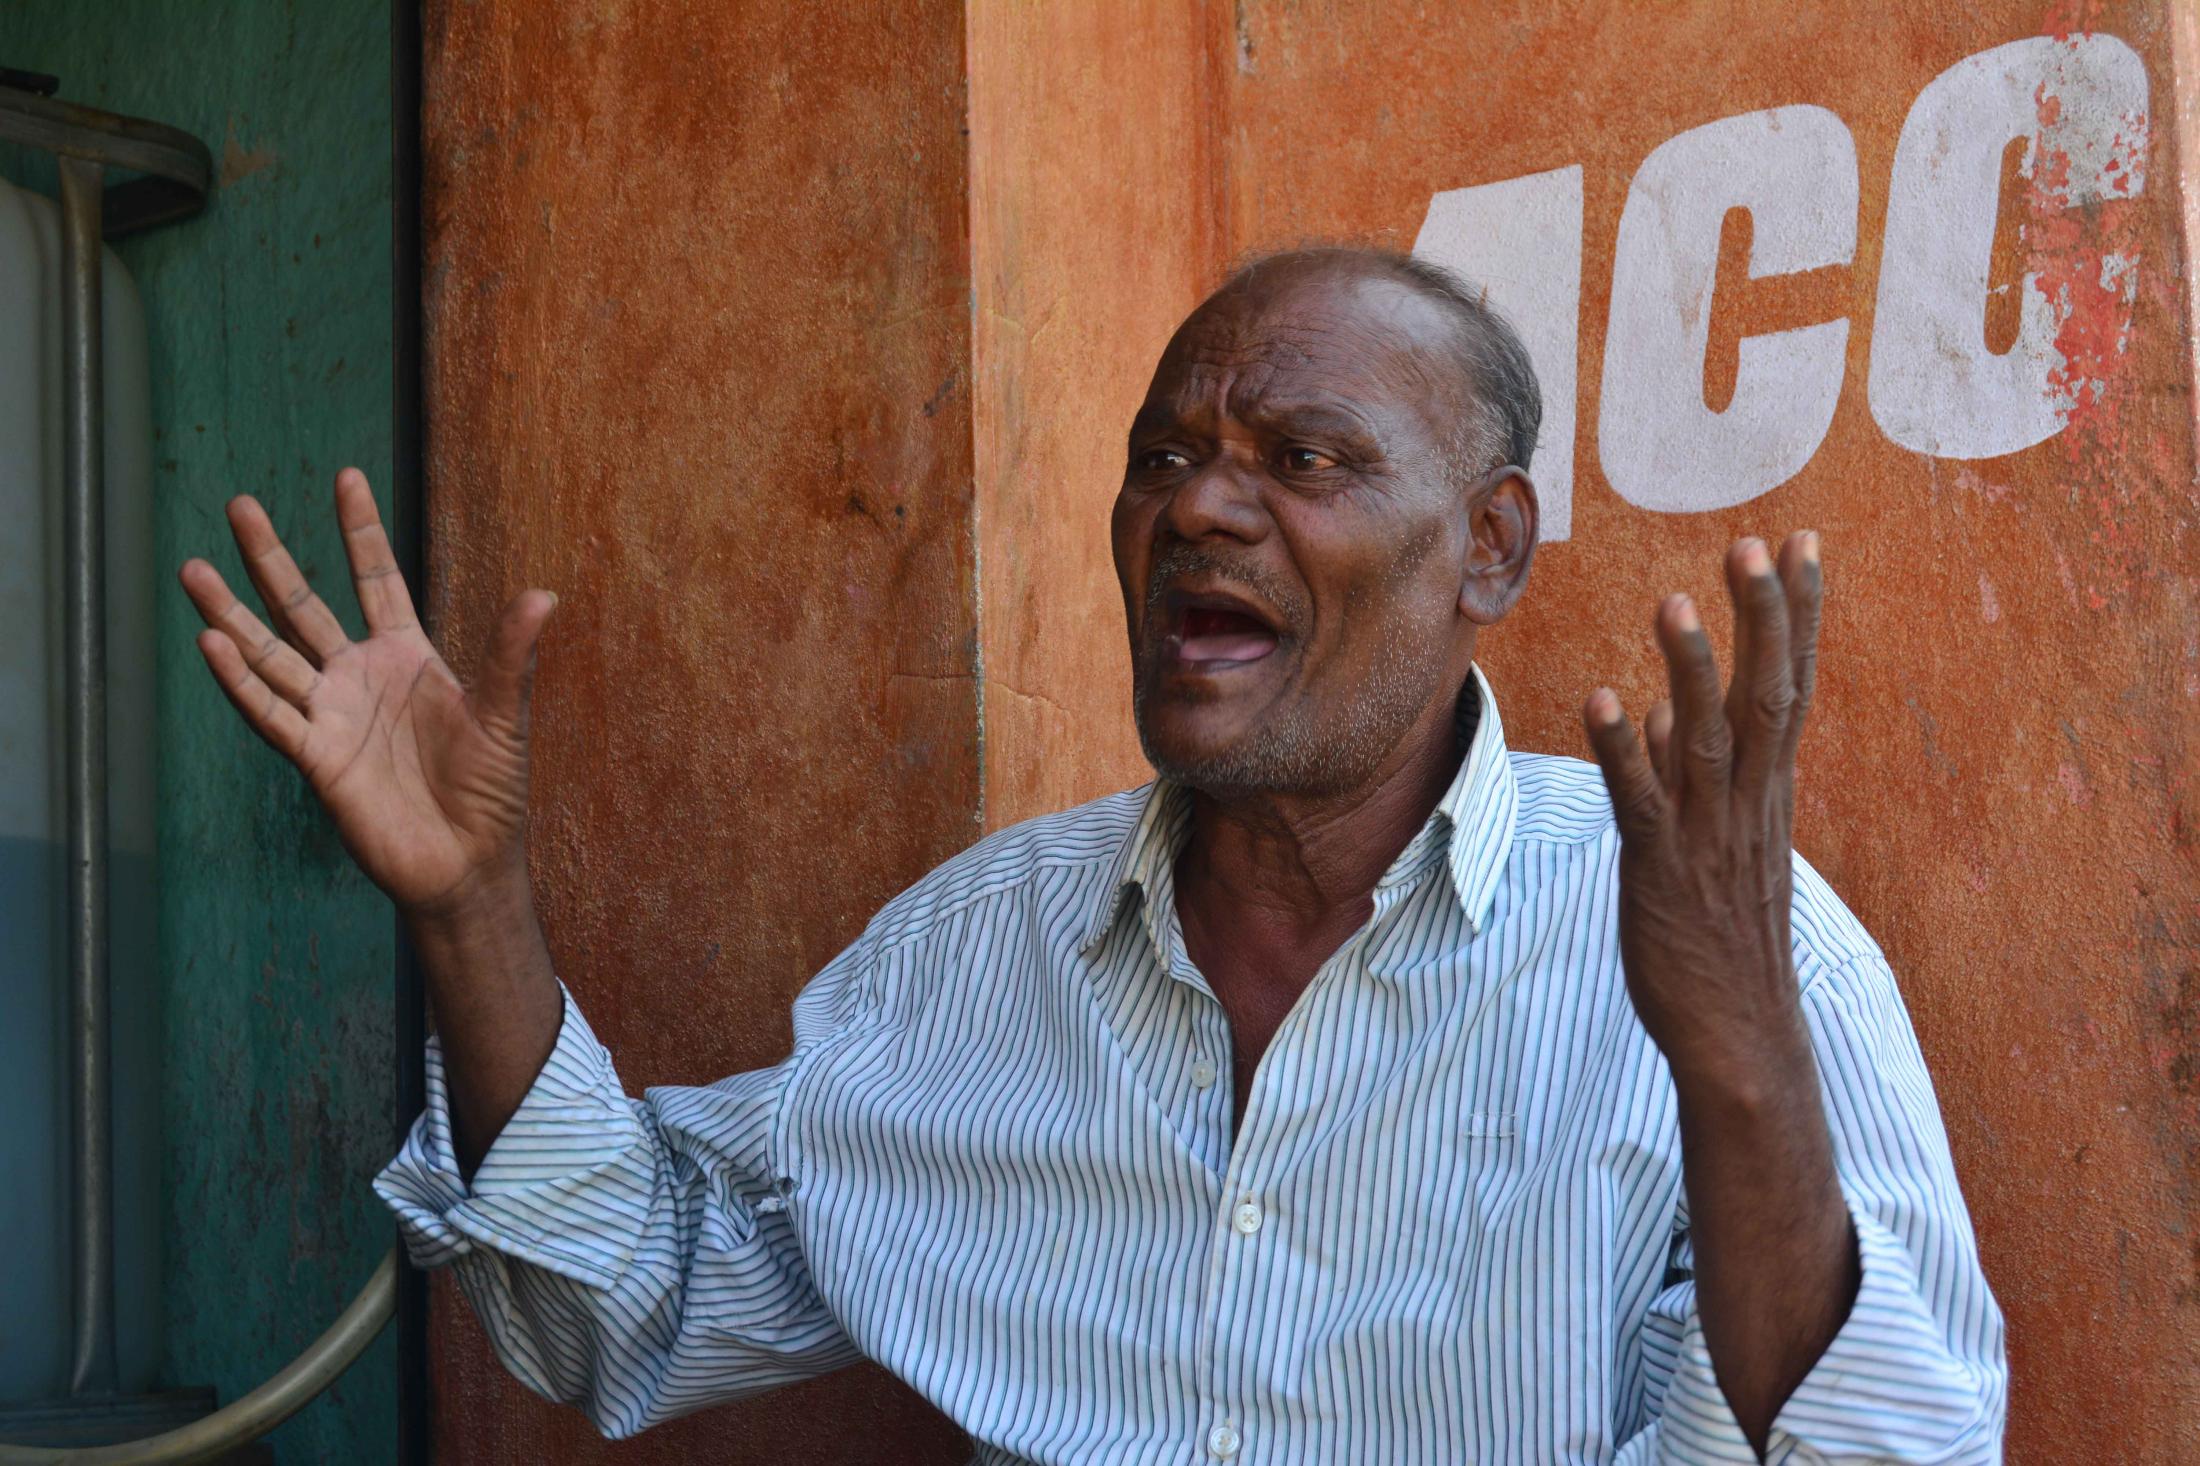 A lot of miners are suffering from Silicosis and after BGML shut along with the mines their treatment stopped as well. This man shares his story.